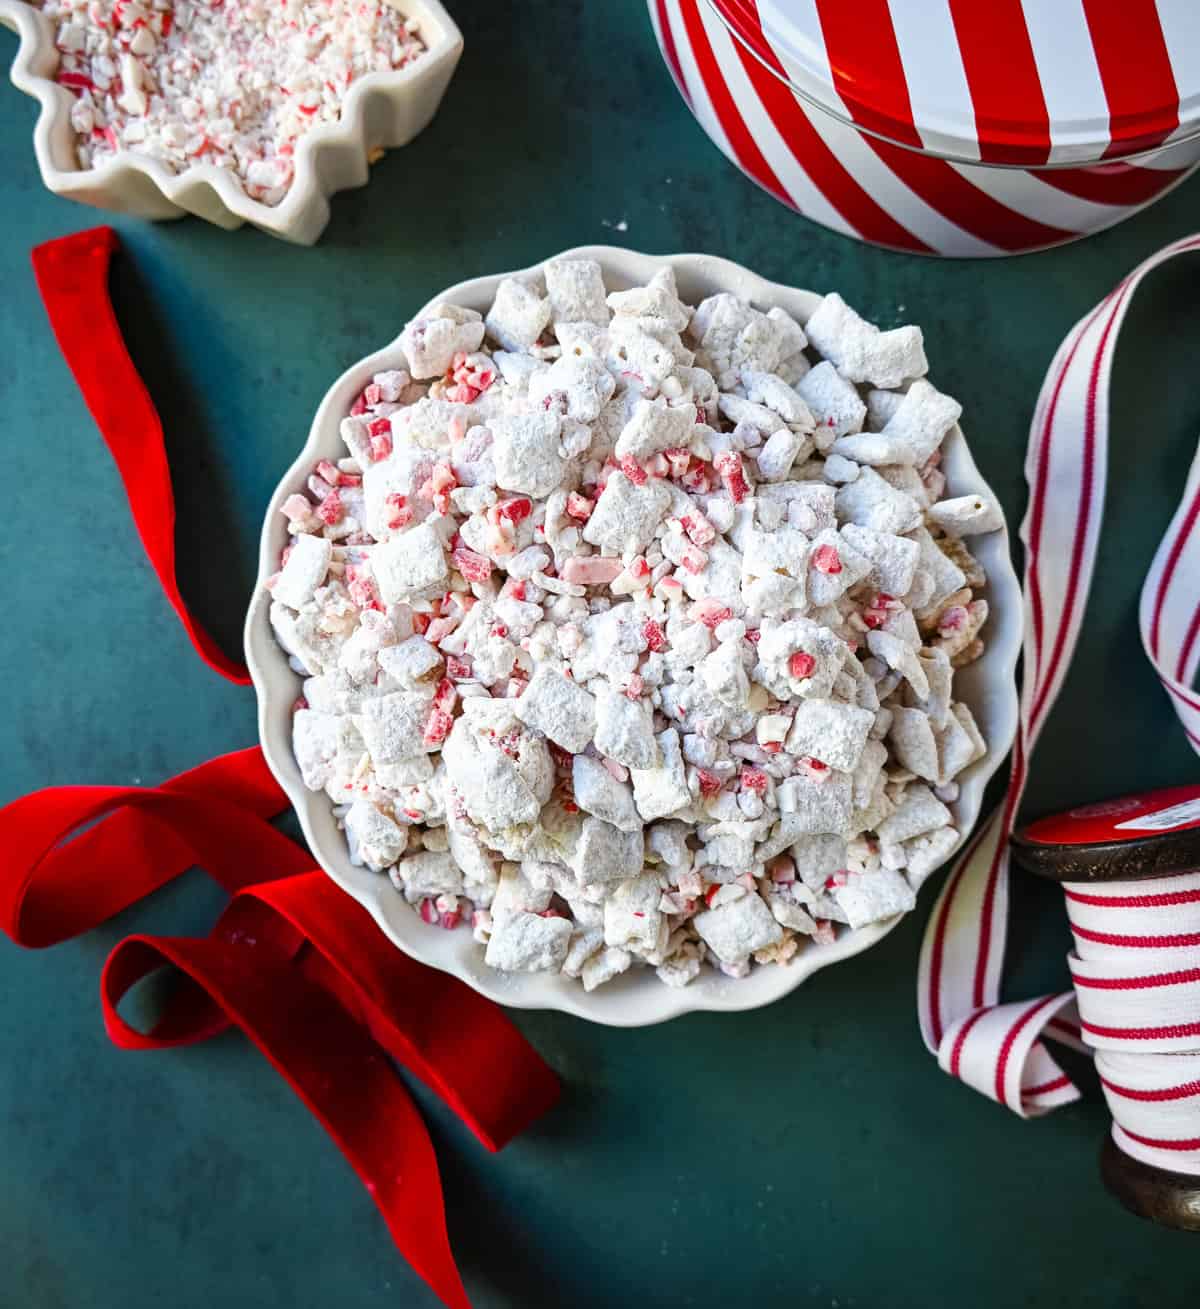 Peppermint Puppy Chow, also known as Peppermint Muddy Buddies, Peppermint Chex Mix, or Peppermint Bark Muddy Buddies, is a festive and addictive holiday treat. It is a variation of the classic Muddy Buddies, but is made with Rice Chex cereal, white chocolate, peppermint bark or candy canes, and powdered sugar. 